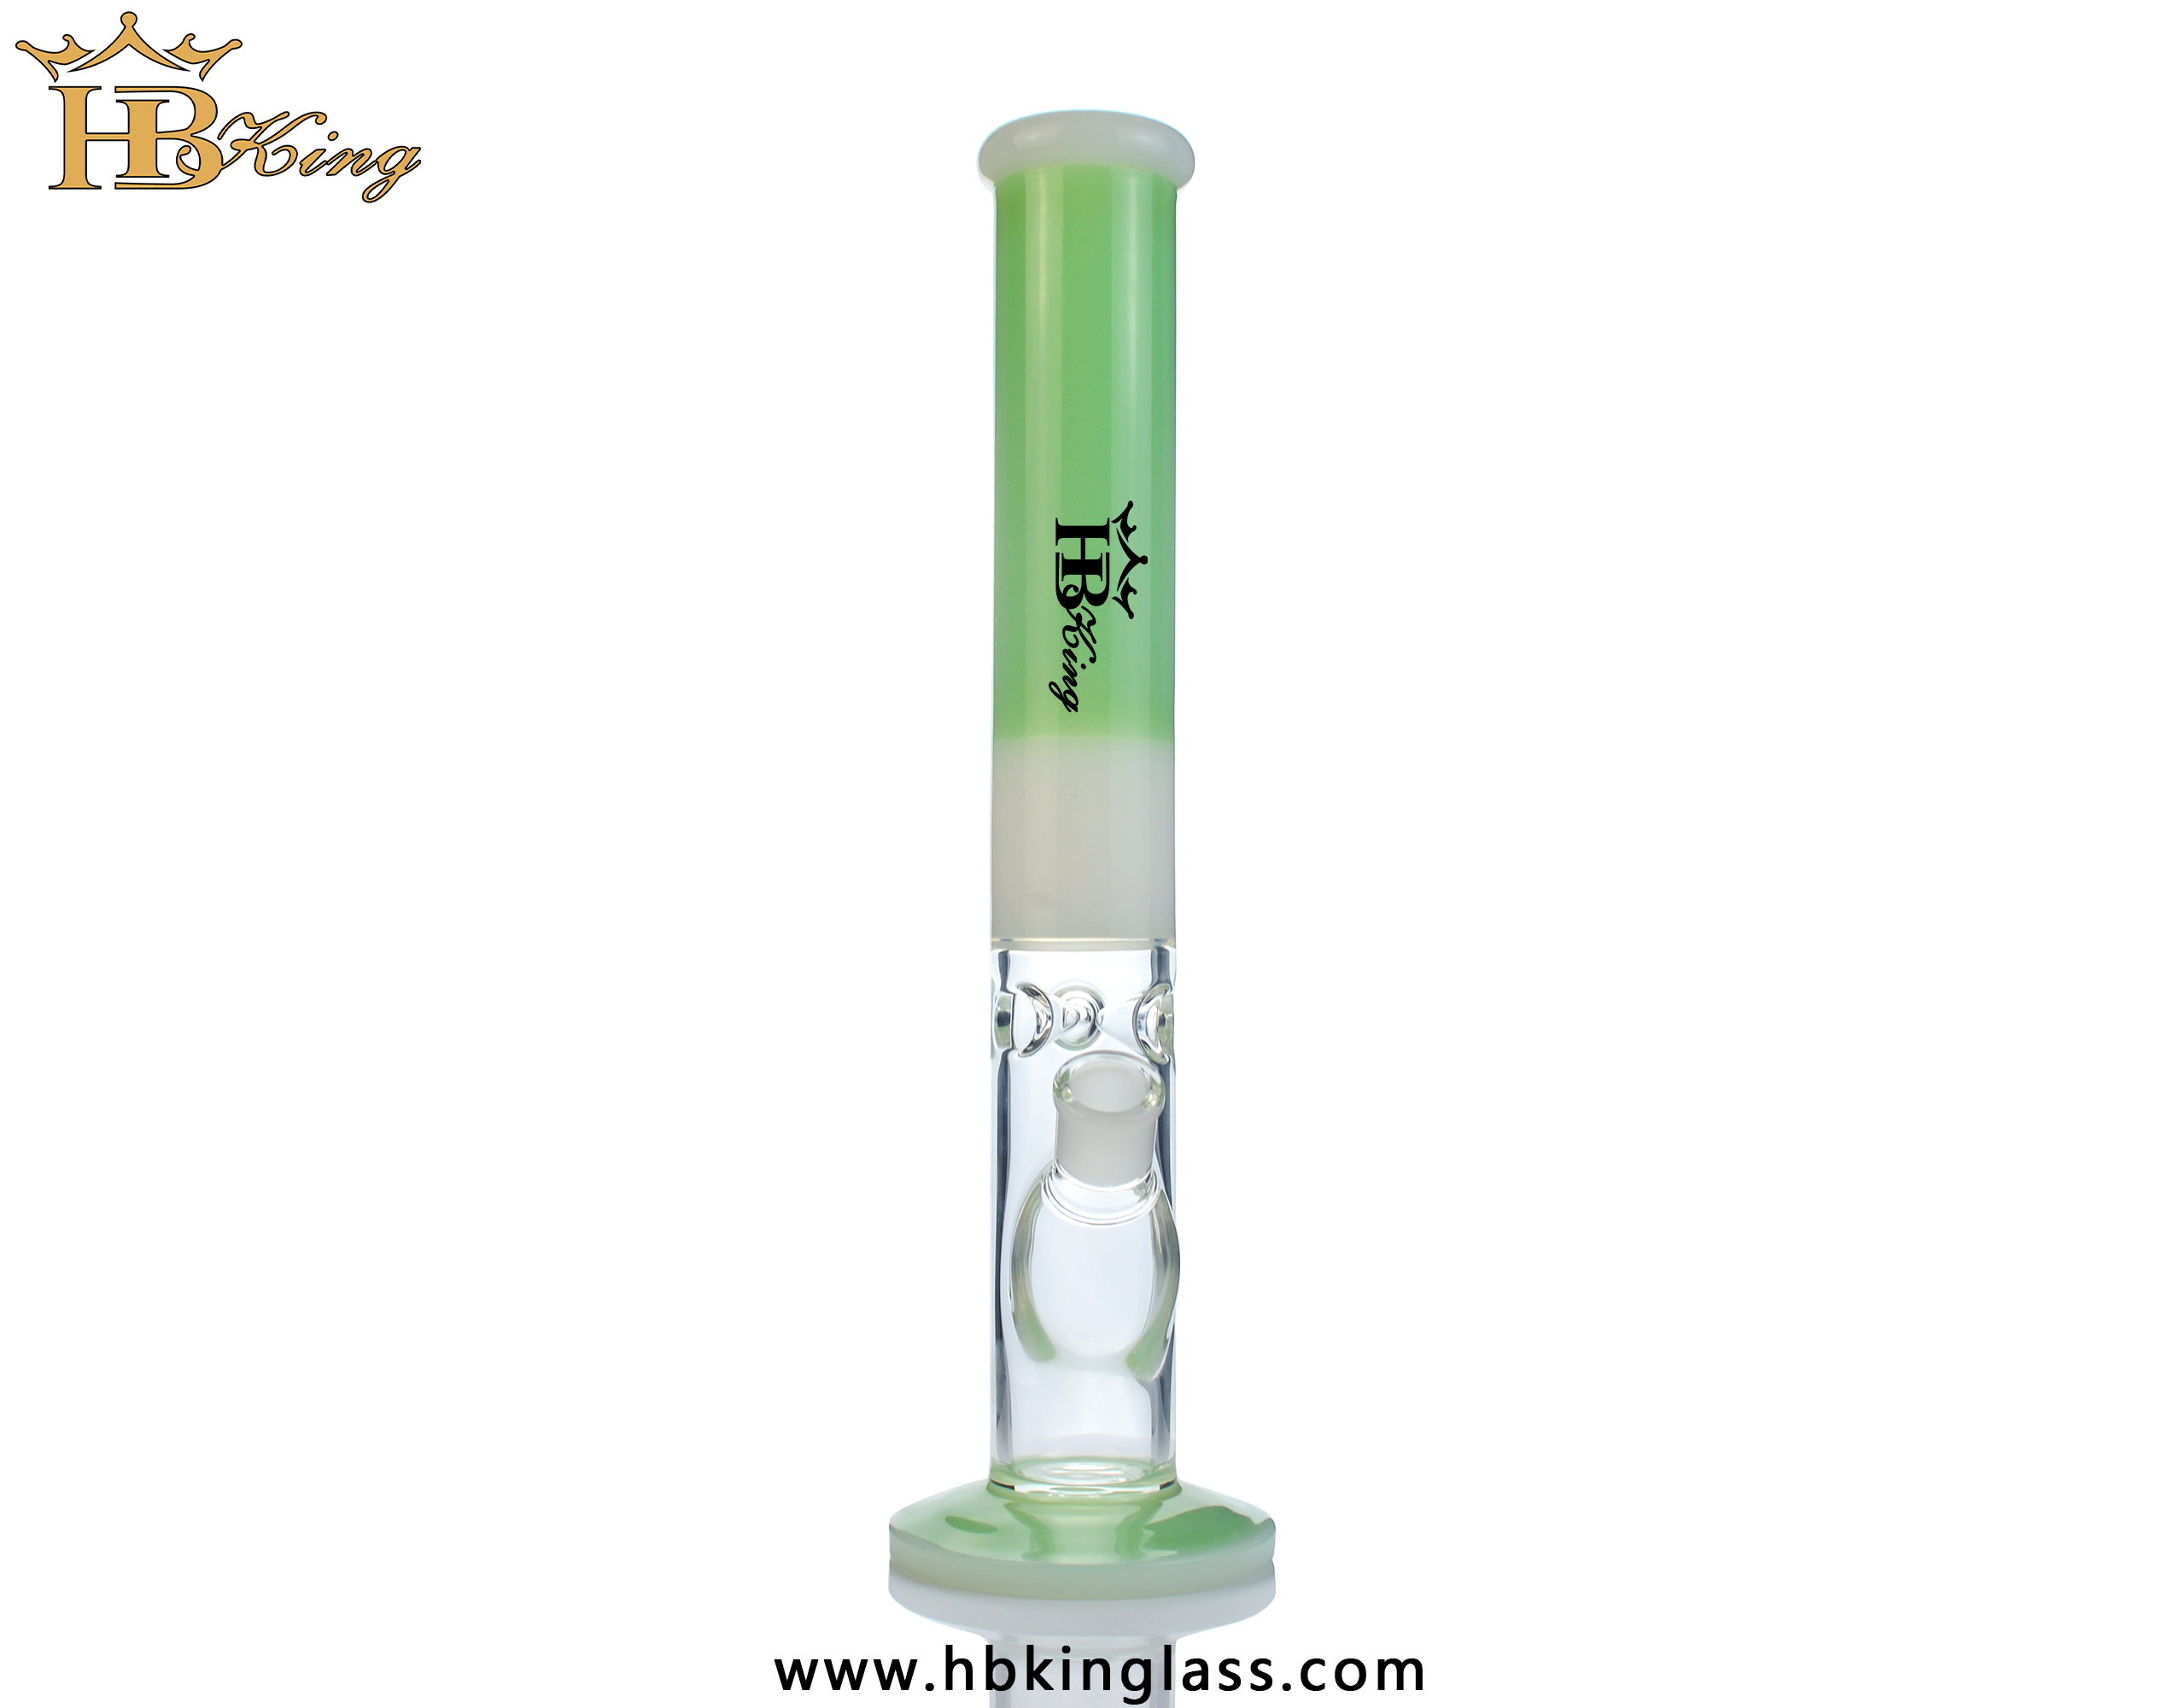 KP4 15.3-inch Assort Color Straight Bong 1